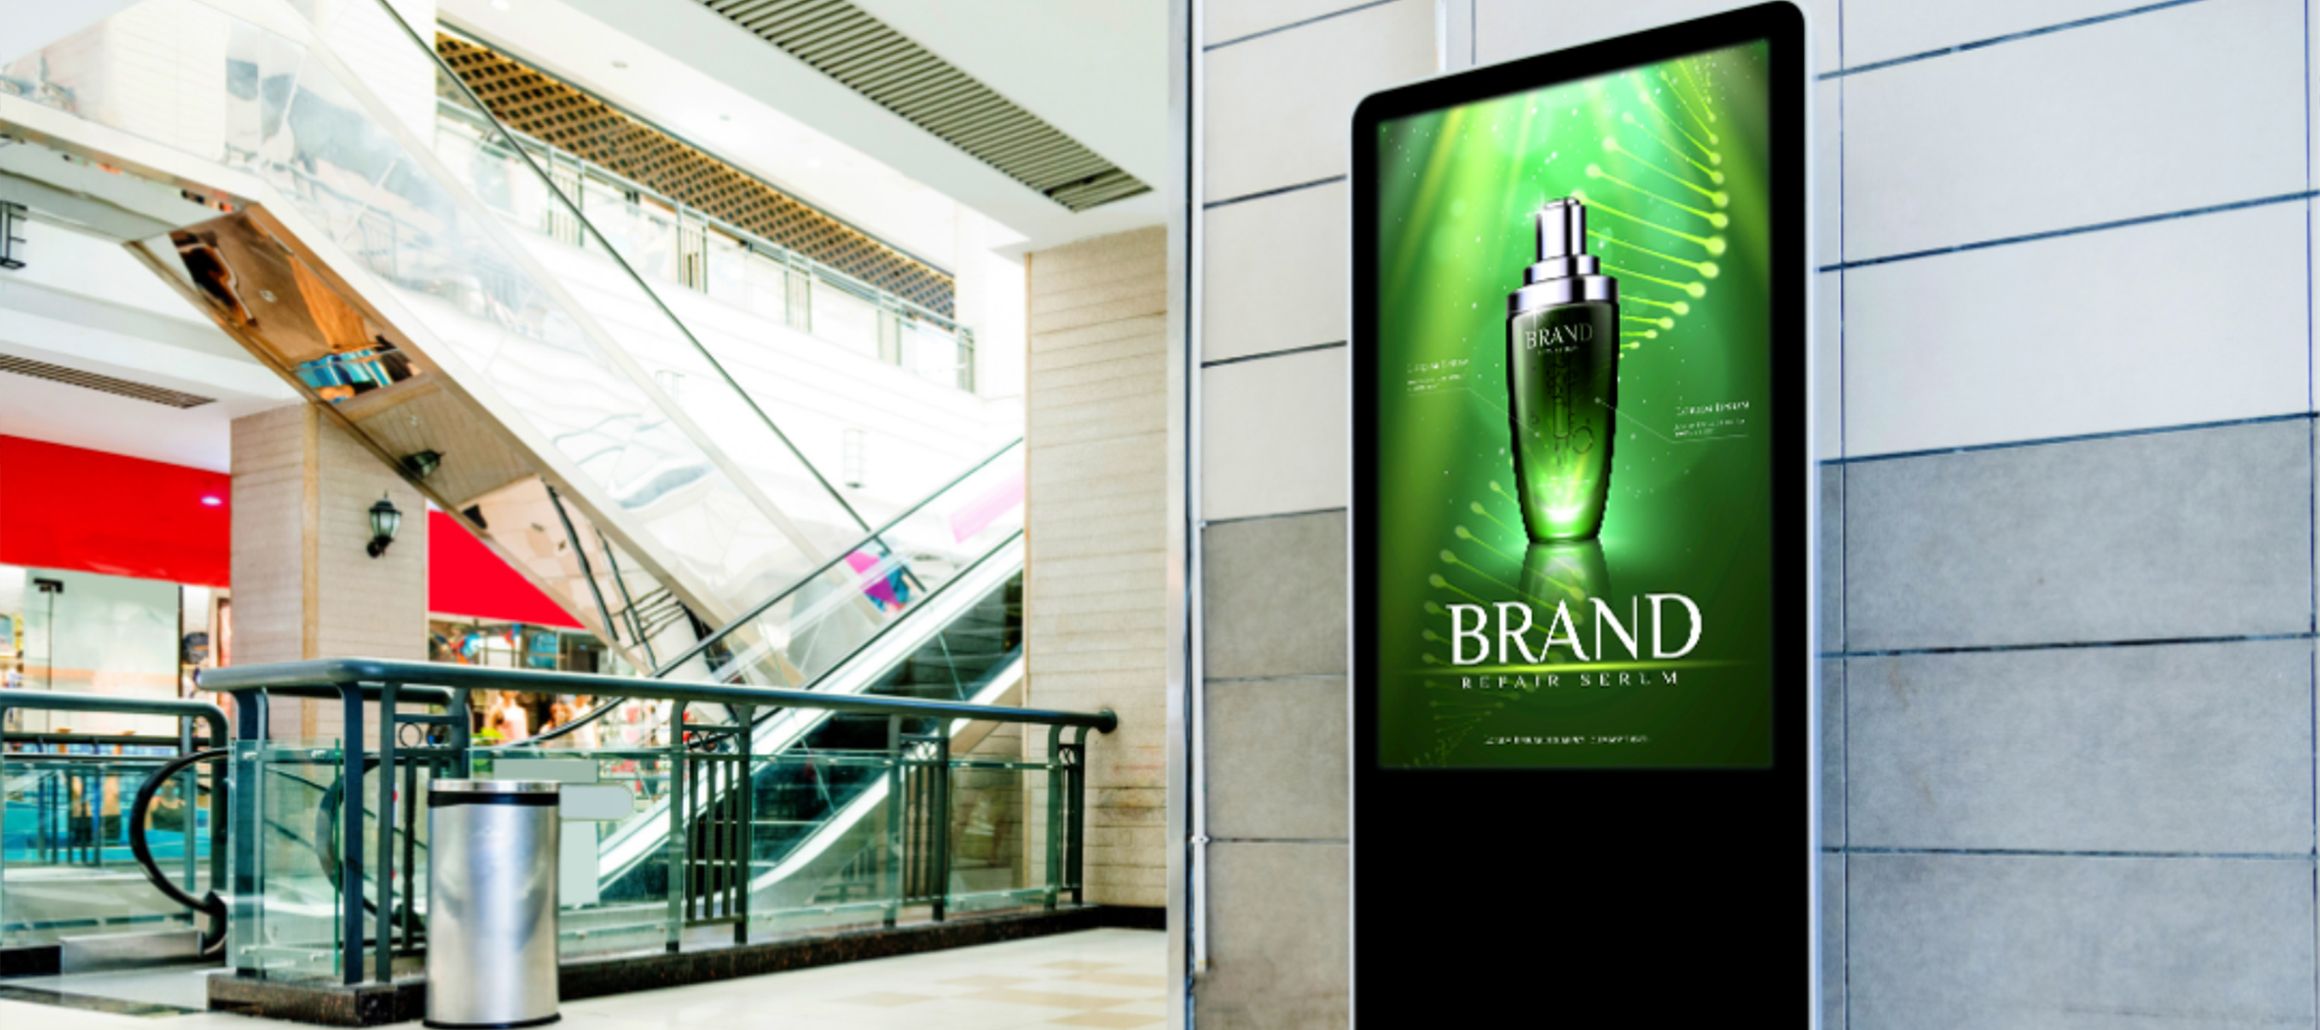 Digital Signage: Increasing Consumer Purchases and Reducing Marketing Costs